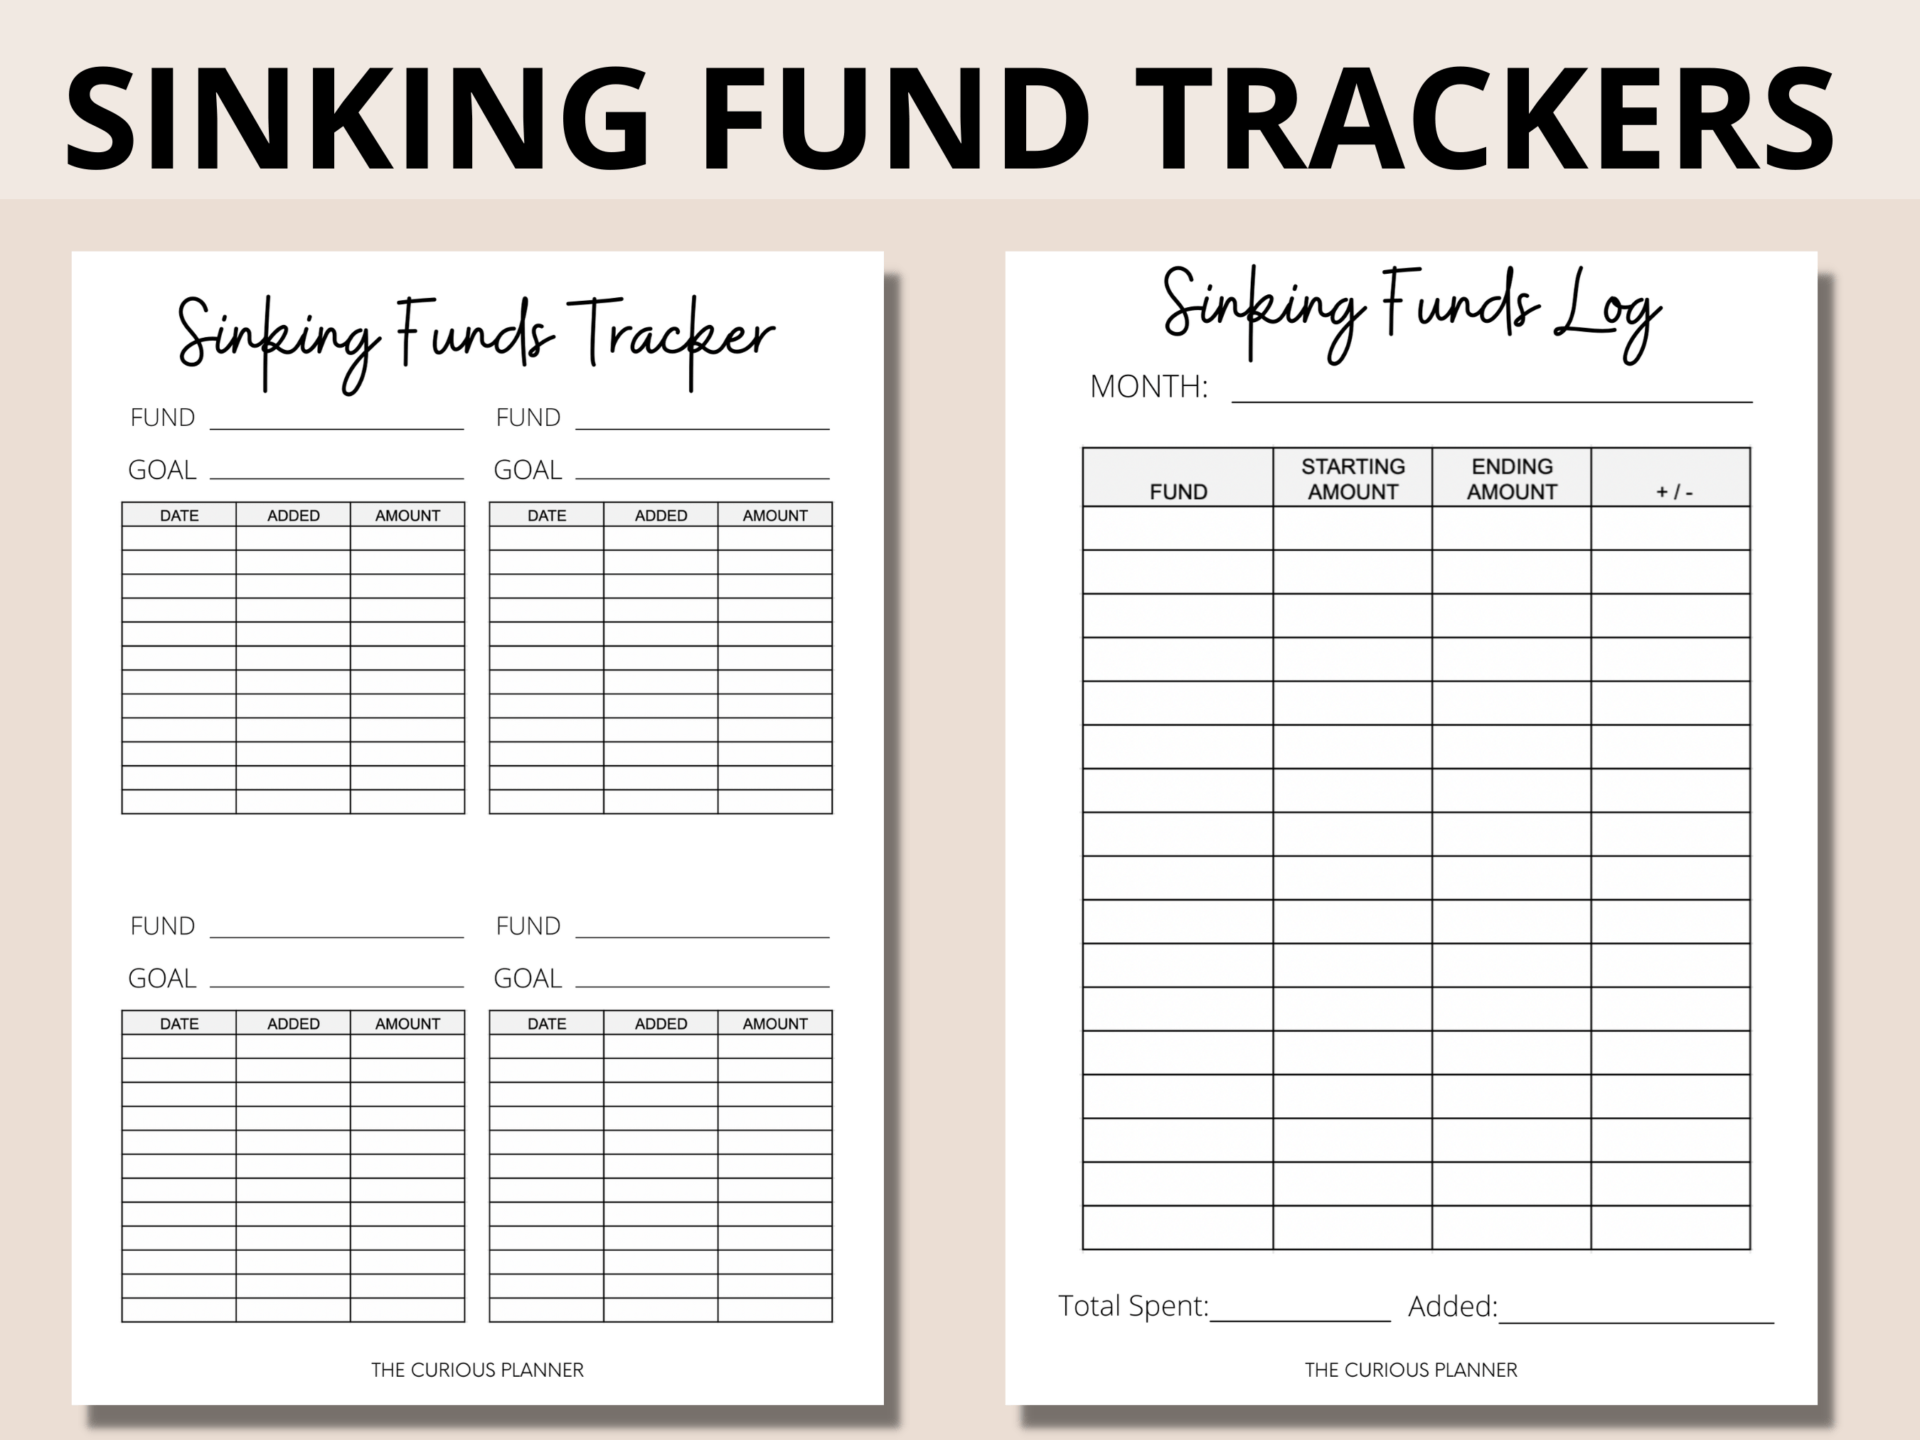 sinking-funds-101-best-free-sinking-funds-tracker-printable-the-curious-planner